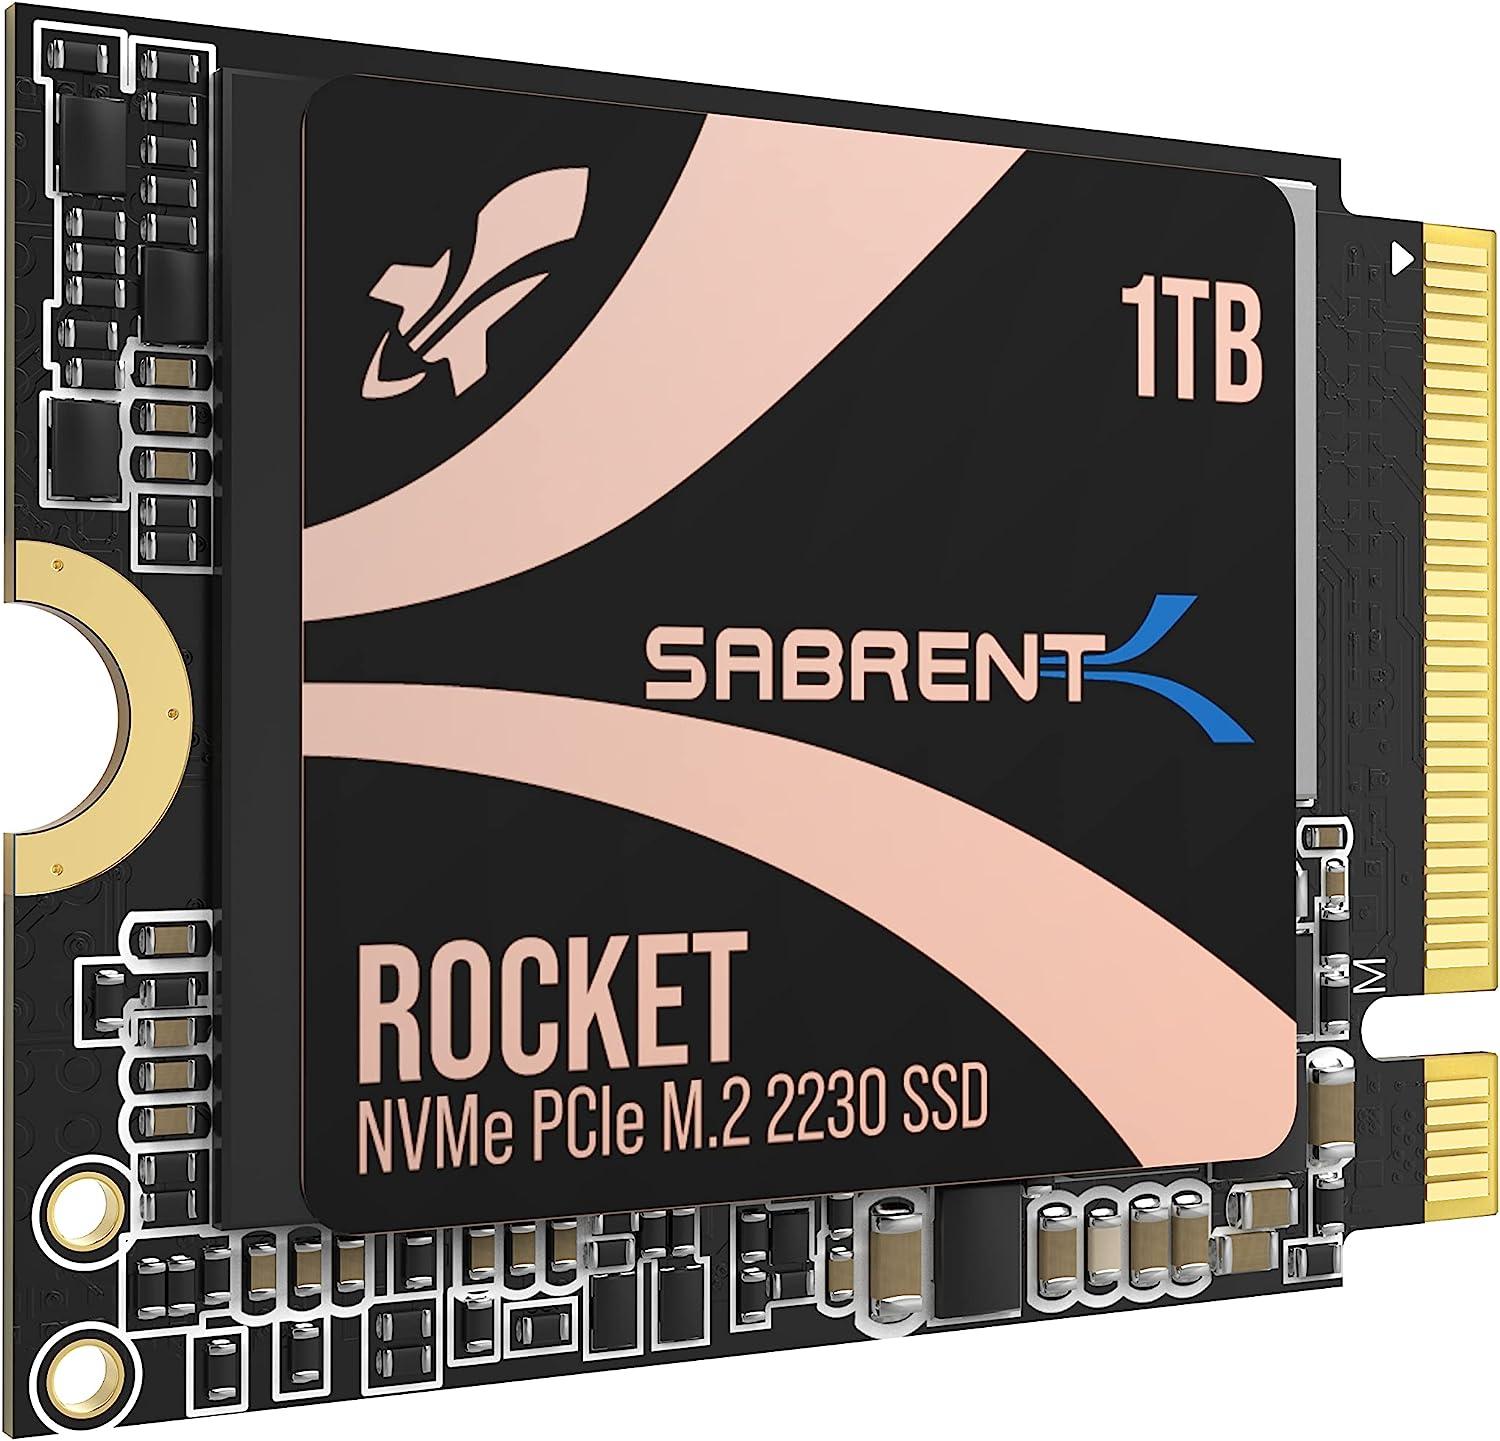 1TB Sabrent Rocket 2230 NVMe PCIe Solid State Drive SSD for $89.06 Shipped